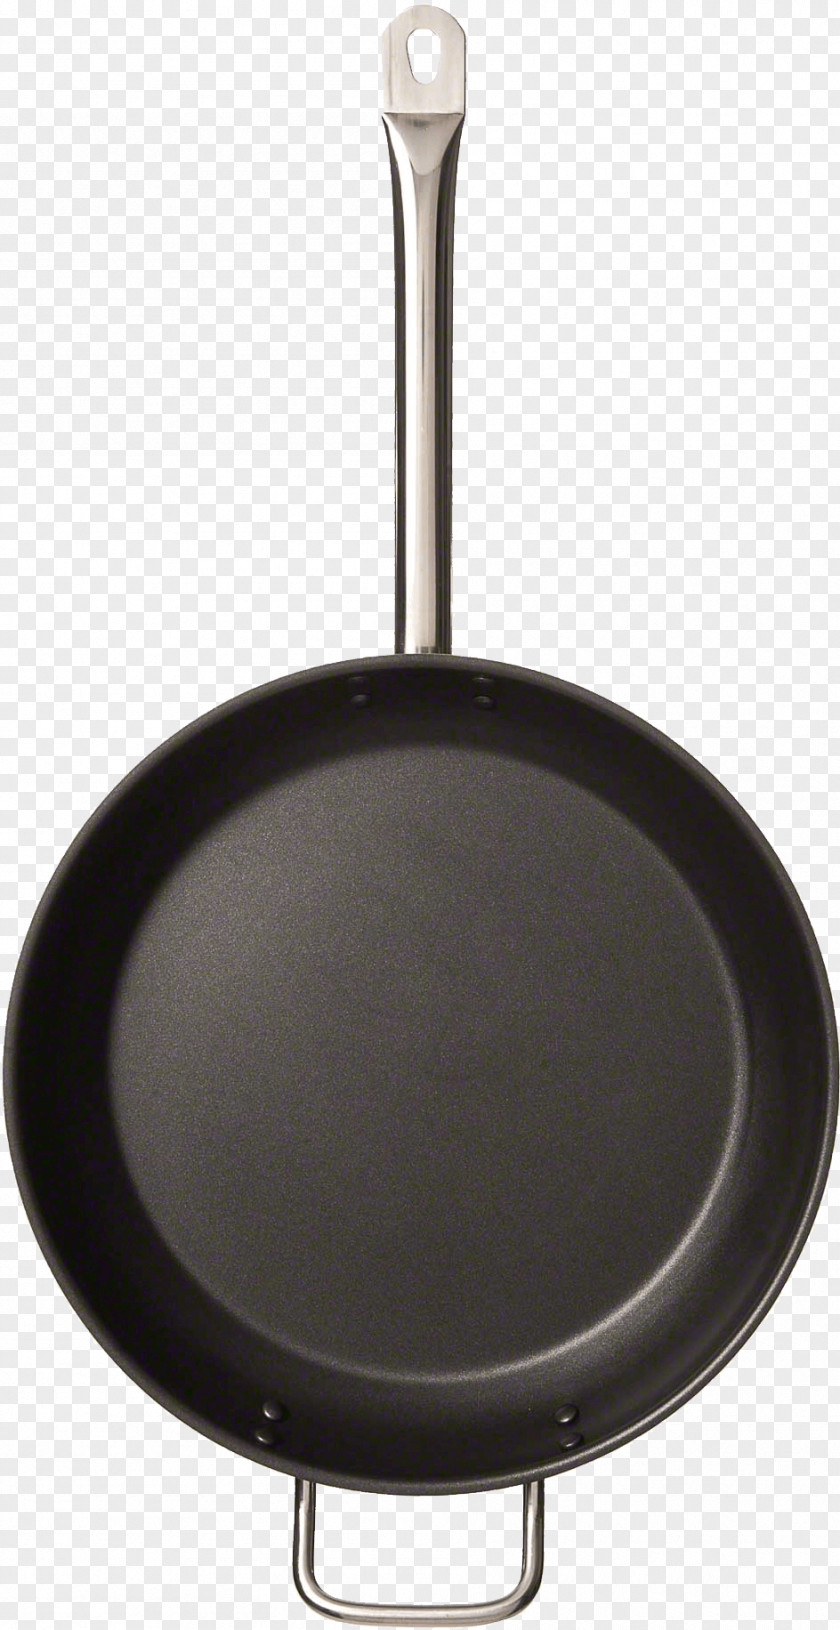 Frying Pan Image United States Lightship Cookware And Bakeware PNG